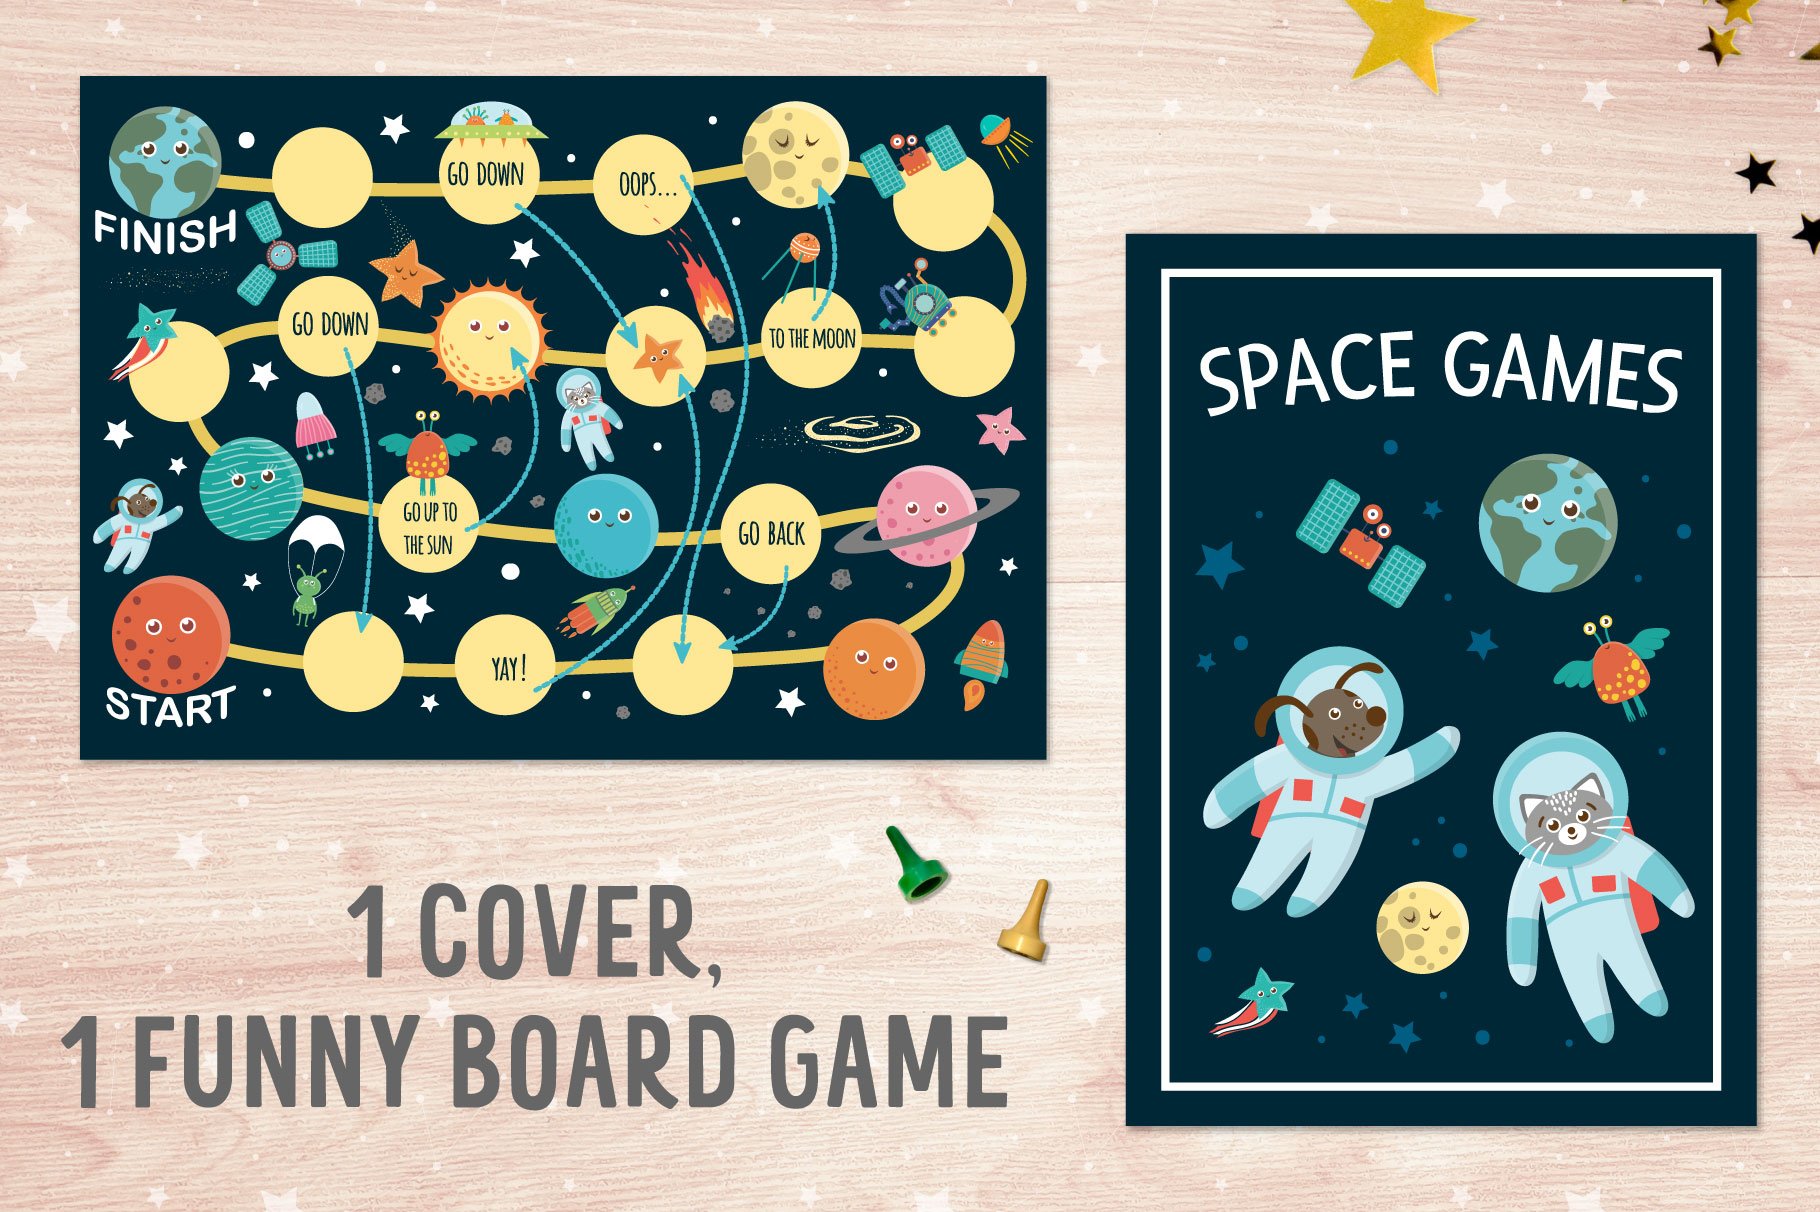 Space Games preview image.